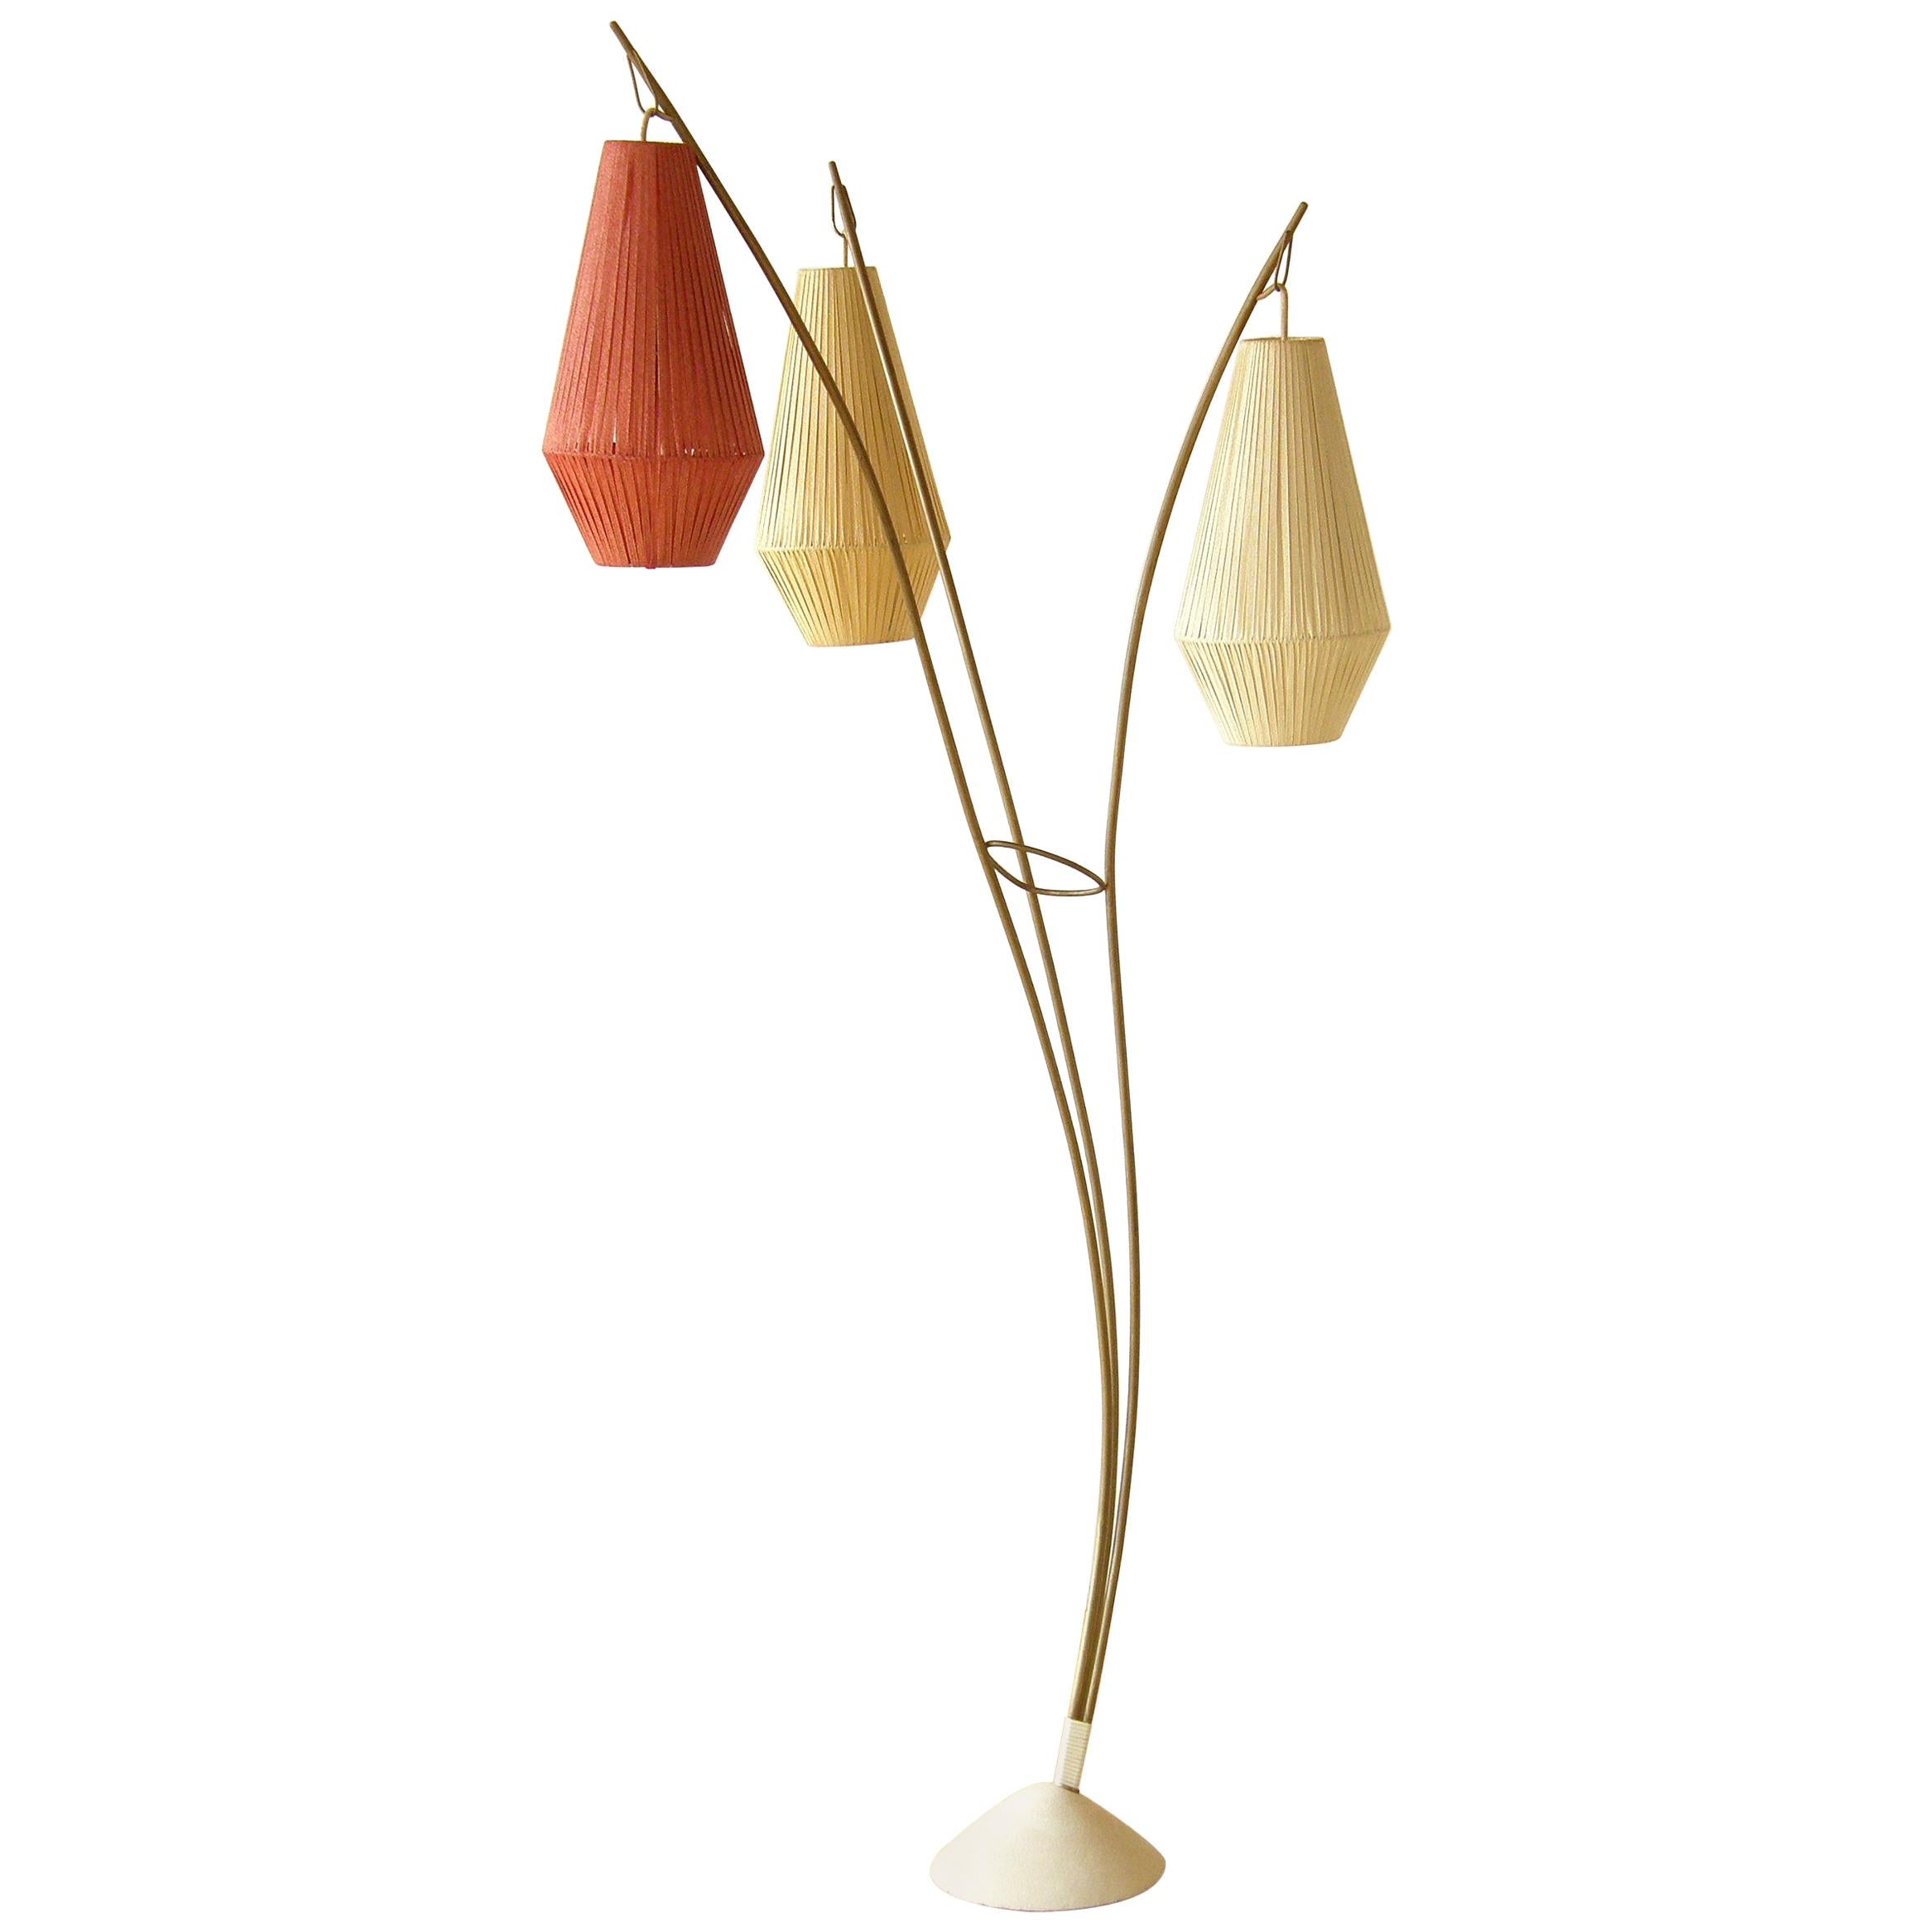 Floor Lamp with Three Curved Arms and Lantern Shaped Woven Ribbon Shades